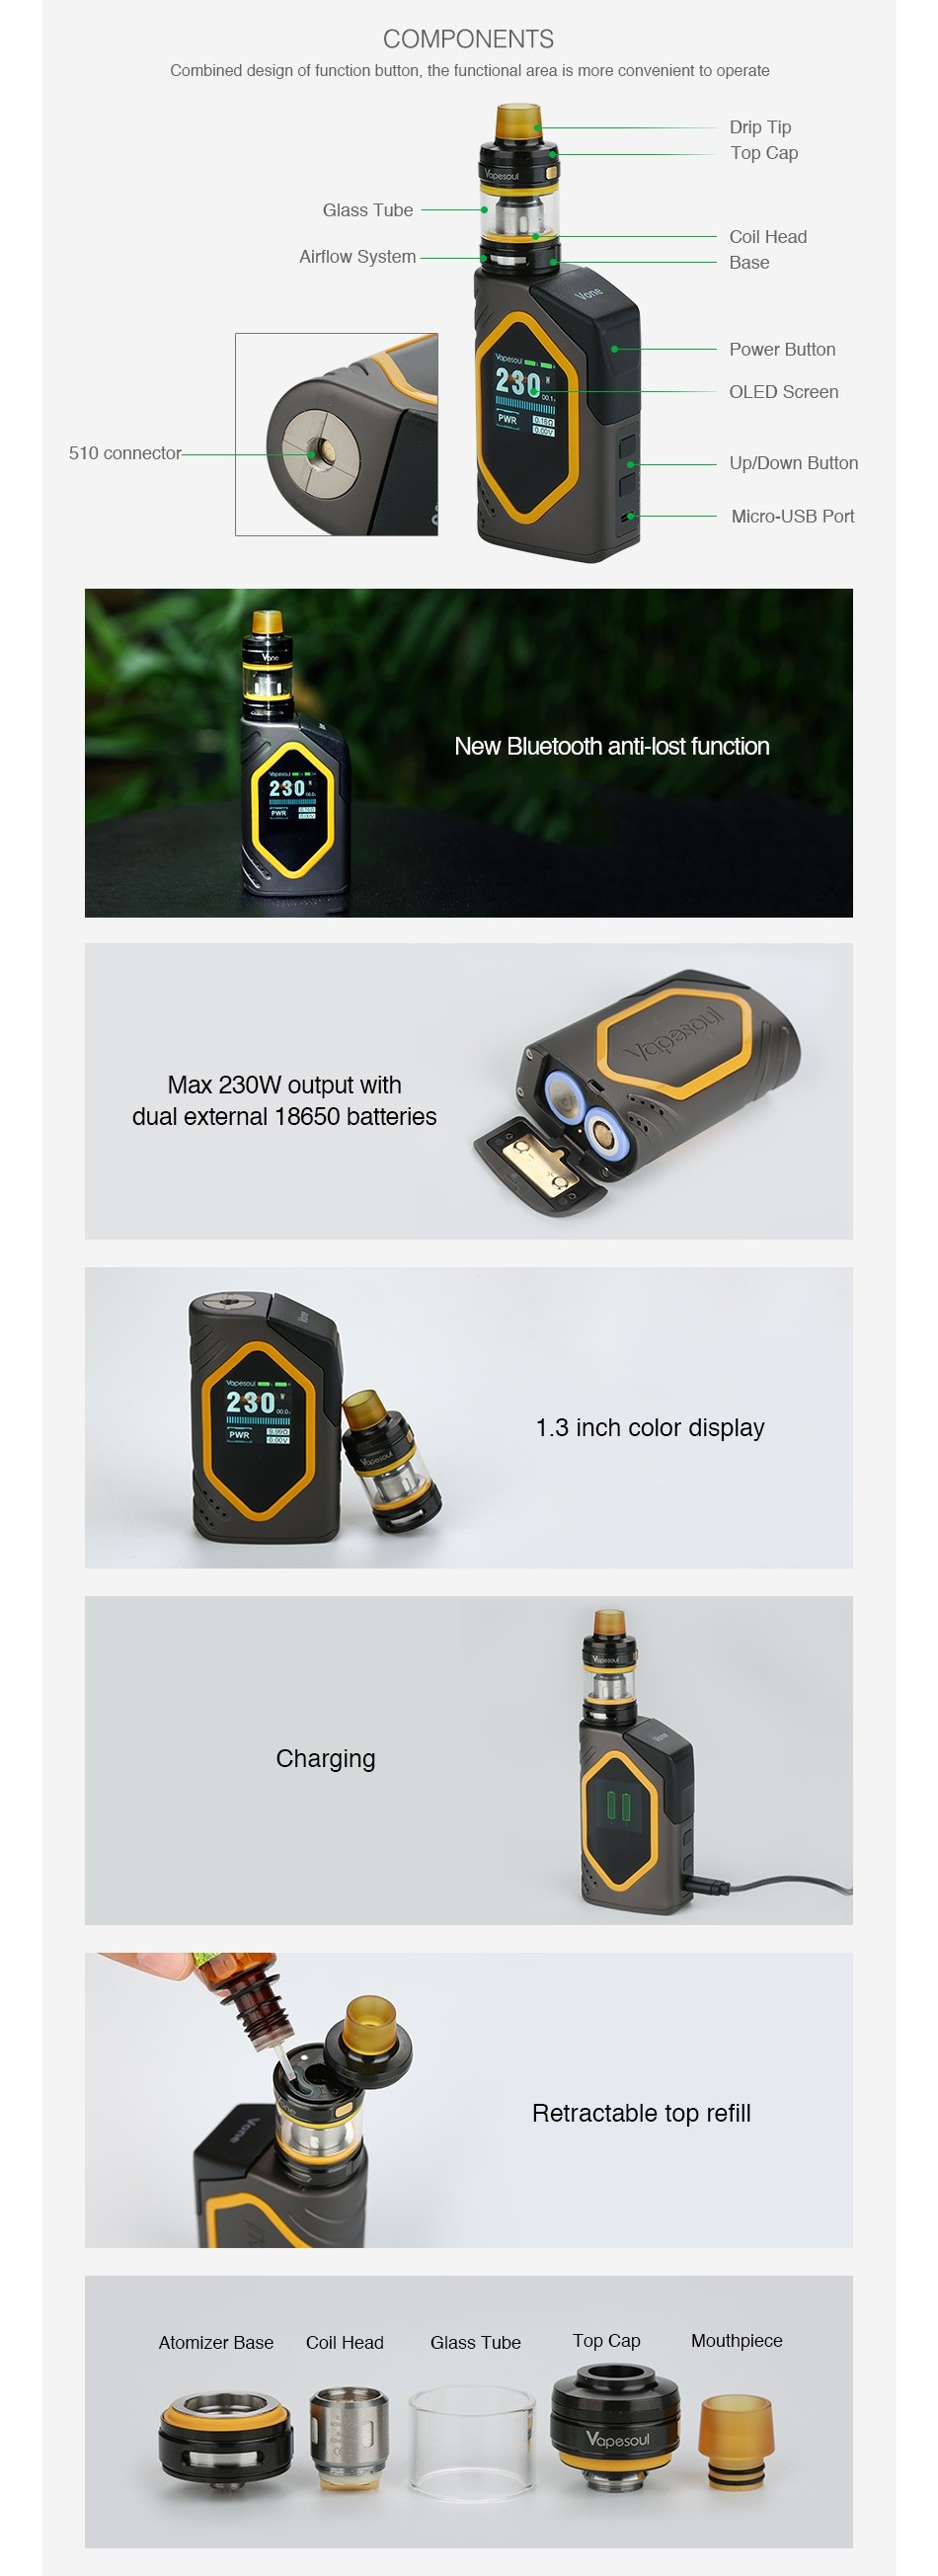 Vapesoul Vone 230W Bluetooth TC Kit COMPONENTS Combined design of function bution  the functiona area is more convenient to operate Airflow Systern Base Power Button 510 connector Up Down Buller New bluetooth anti lost function 230 Max 230W output with dual external 1 8650 batteries 1 3 inch color display Charging Retractable top refill Atomizer Base Coil I lead Top cap MolIthplccc e